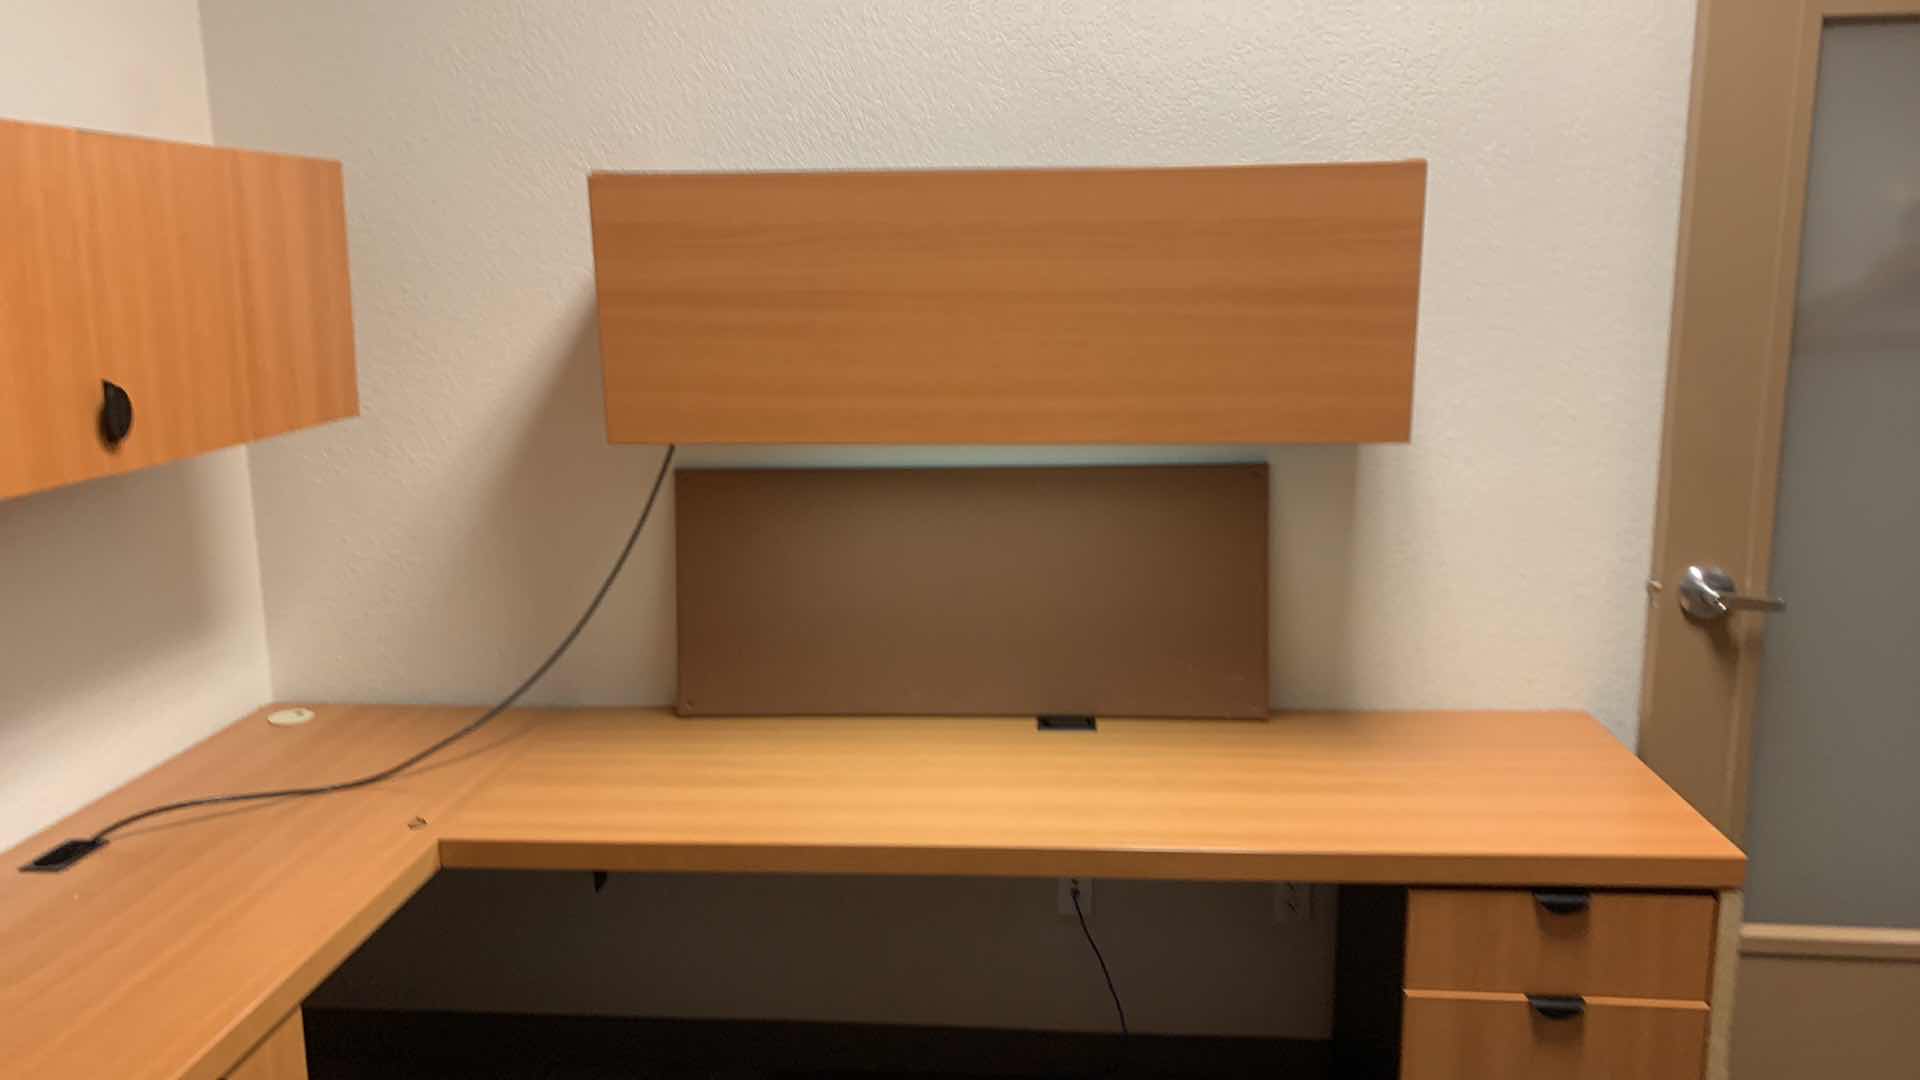 Photo 4 of MAGNA DESIGN LAS VEGAS WOOD WORK STATION/ OFFICE CORNER DESK UNIT 
ONE LOWER DESK  72” x 24” WITH RETURN 52” x 24”, ONE SOUND BOARD AND TWO UPPER CABINETS WITH LIGHTS AND METAL DIVIDERS